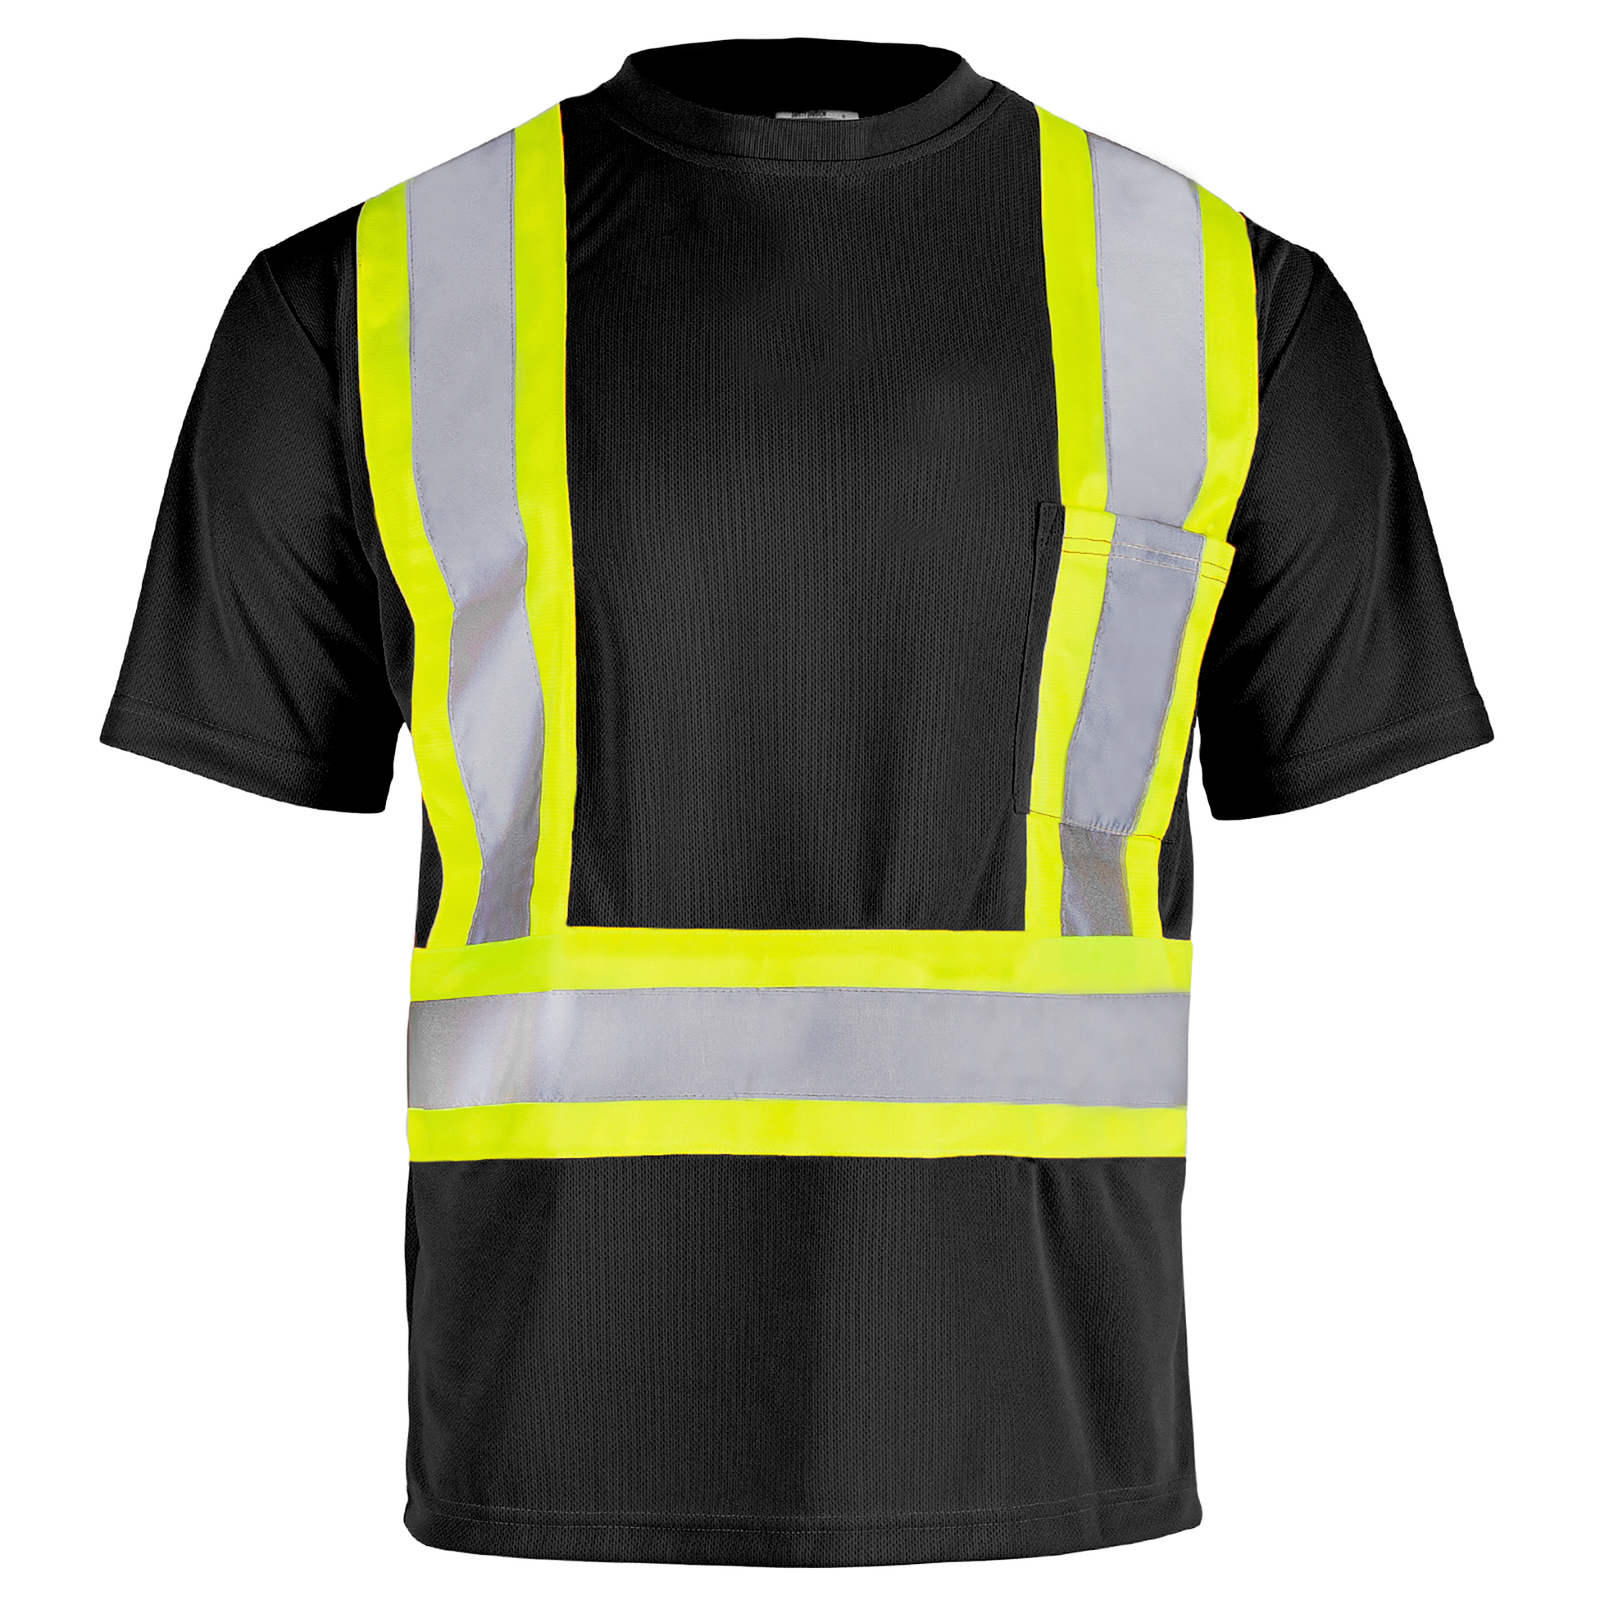 front view of a JORESTECH Hi-vis reflective two tone safety black and yellow pocket shirt built with bids eye polyester fabric